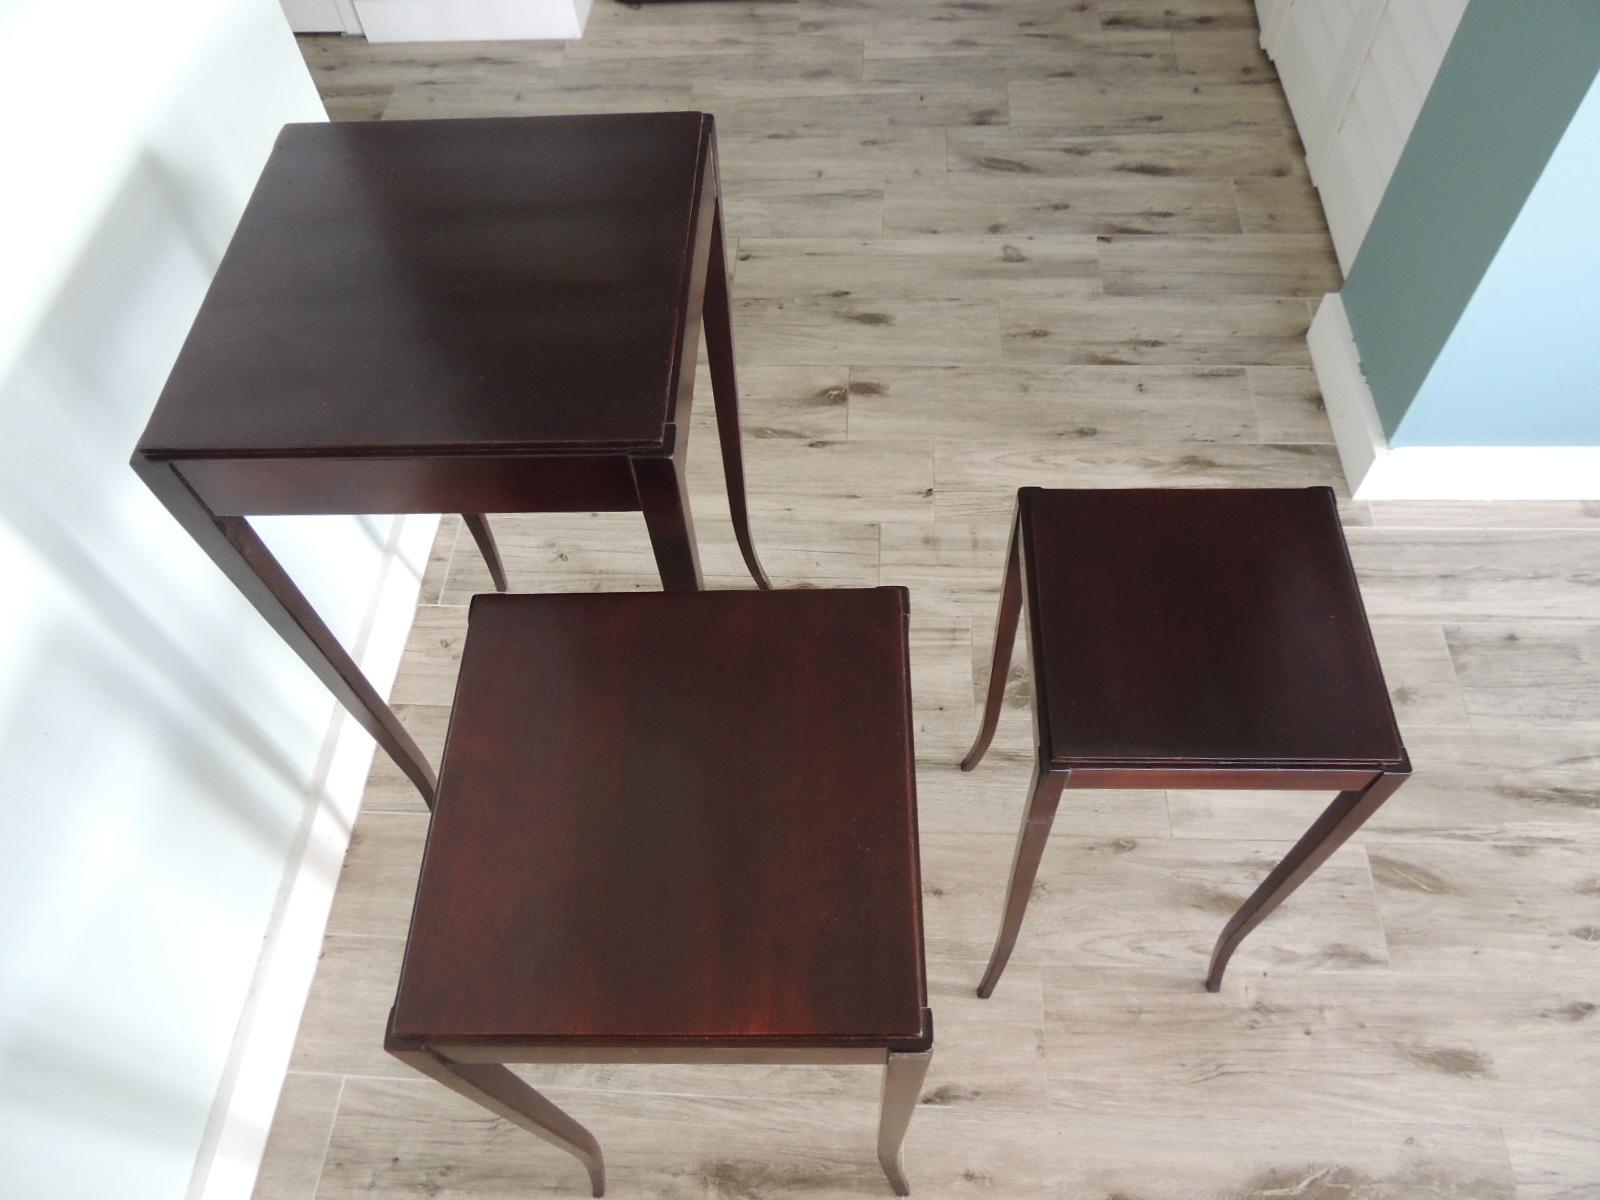 Set of (3) nesting tables By Barbara Barry for Baker Furniture.
Sizes:
TOP: 14.75